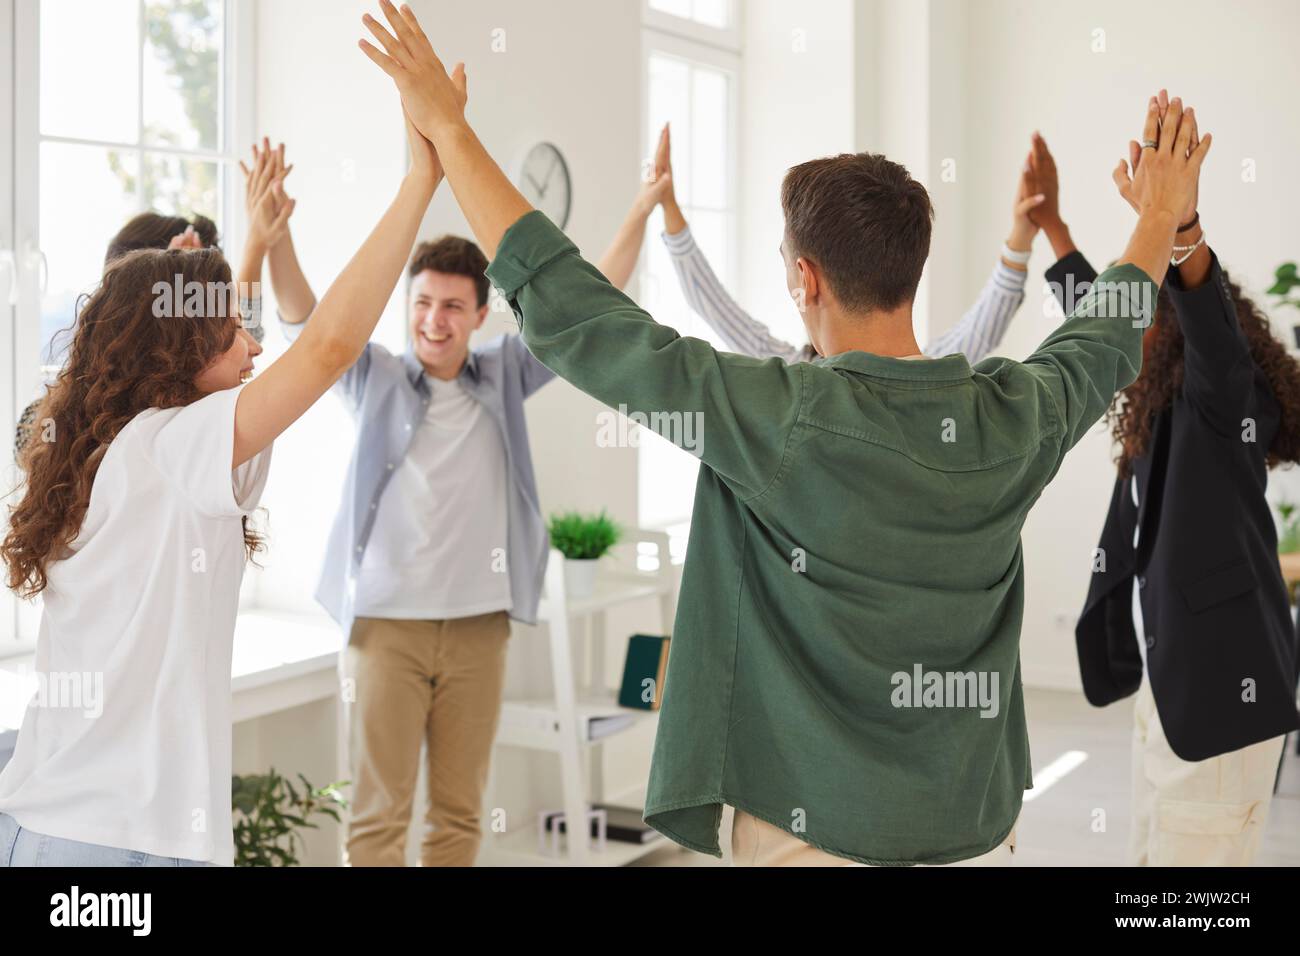 Group of happy diverse teenage boys and girls make friends and have fun at school Stock Photo